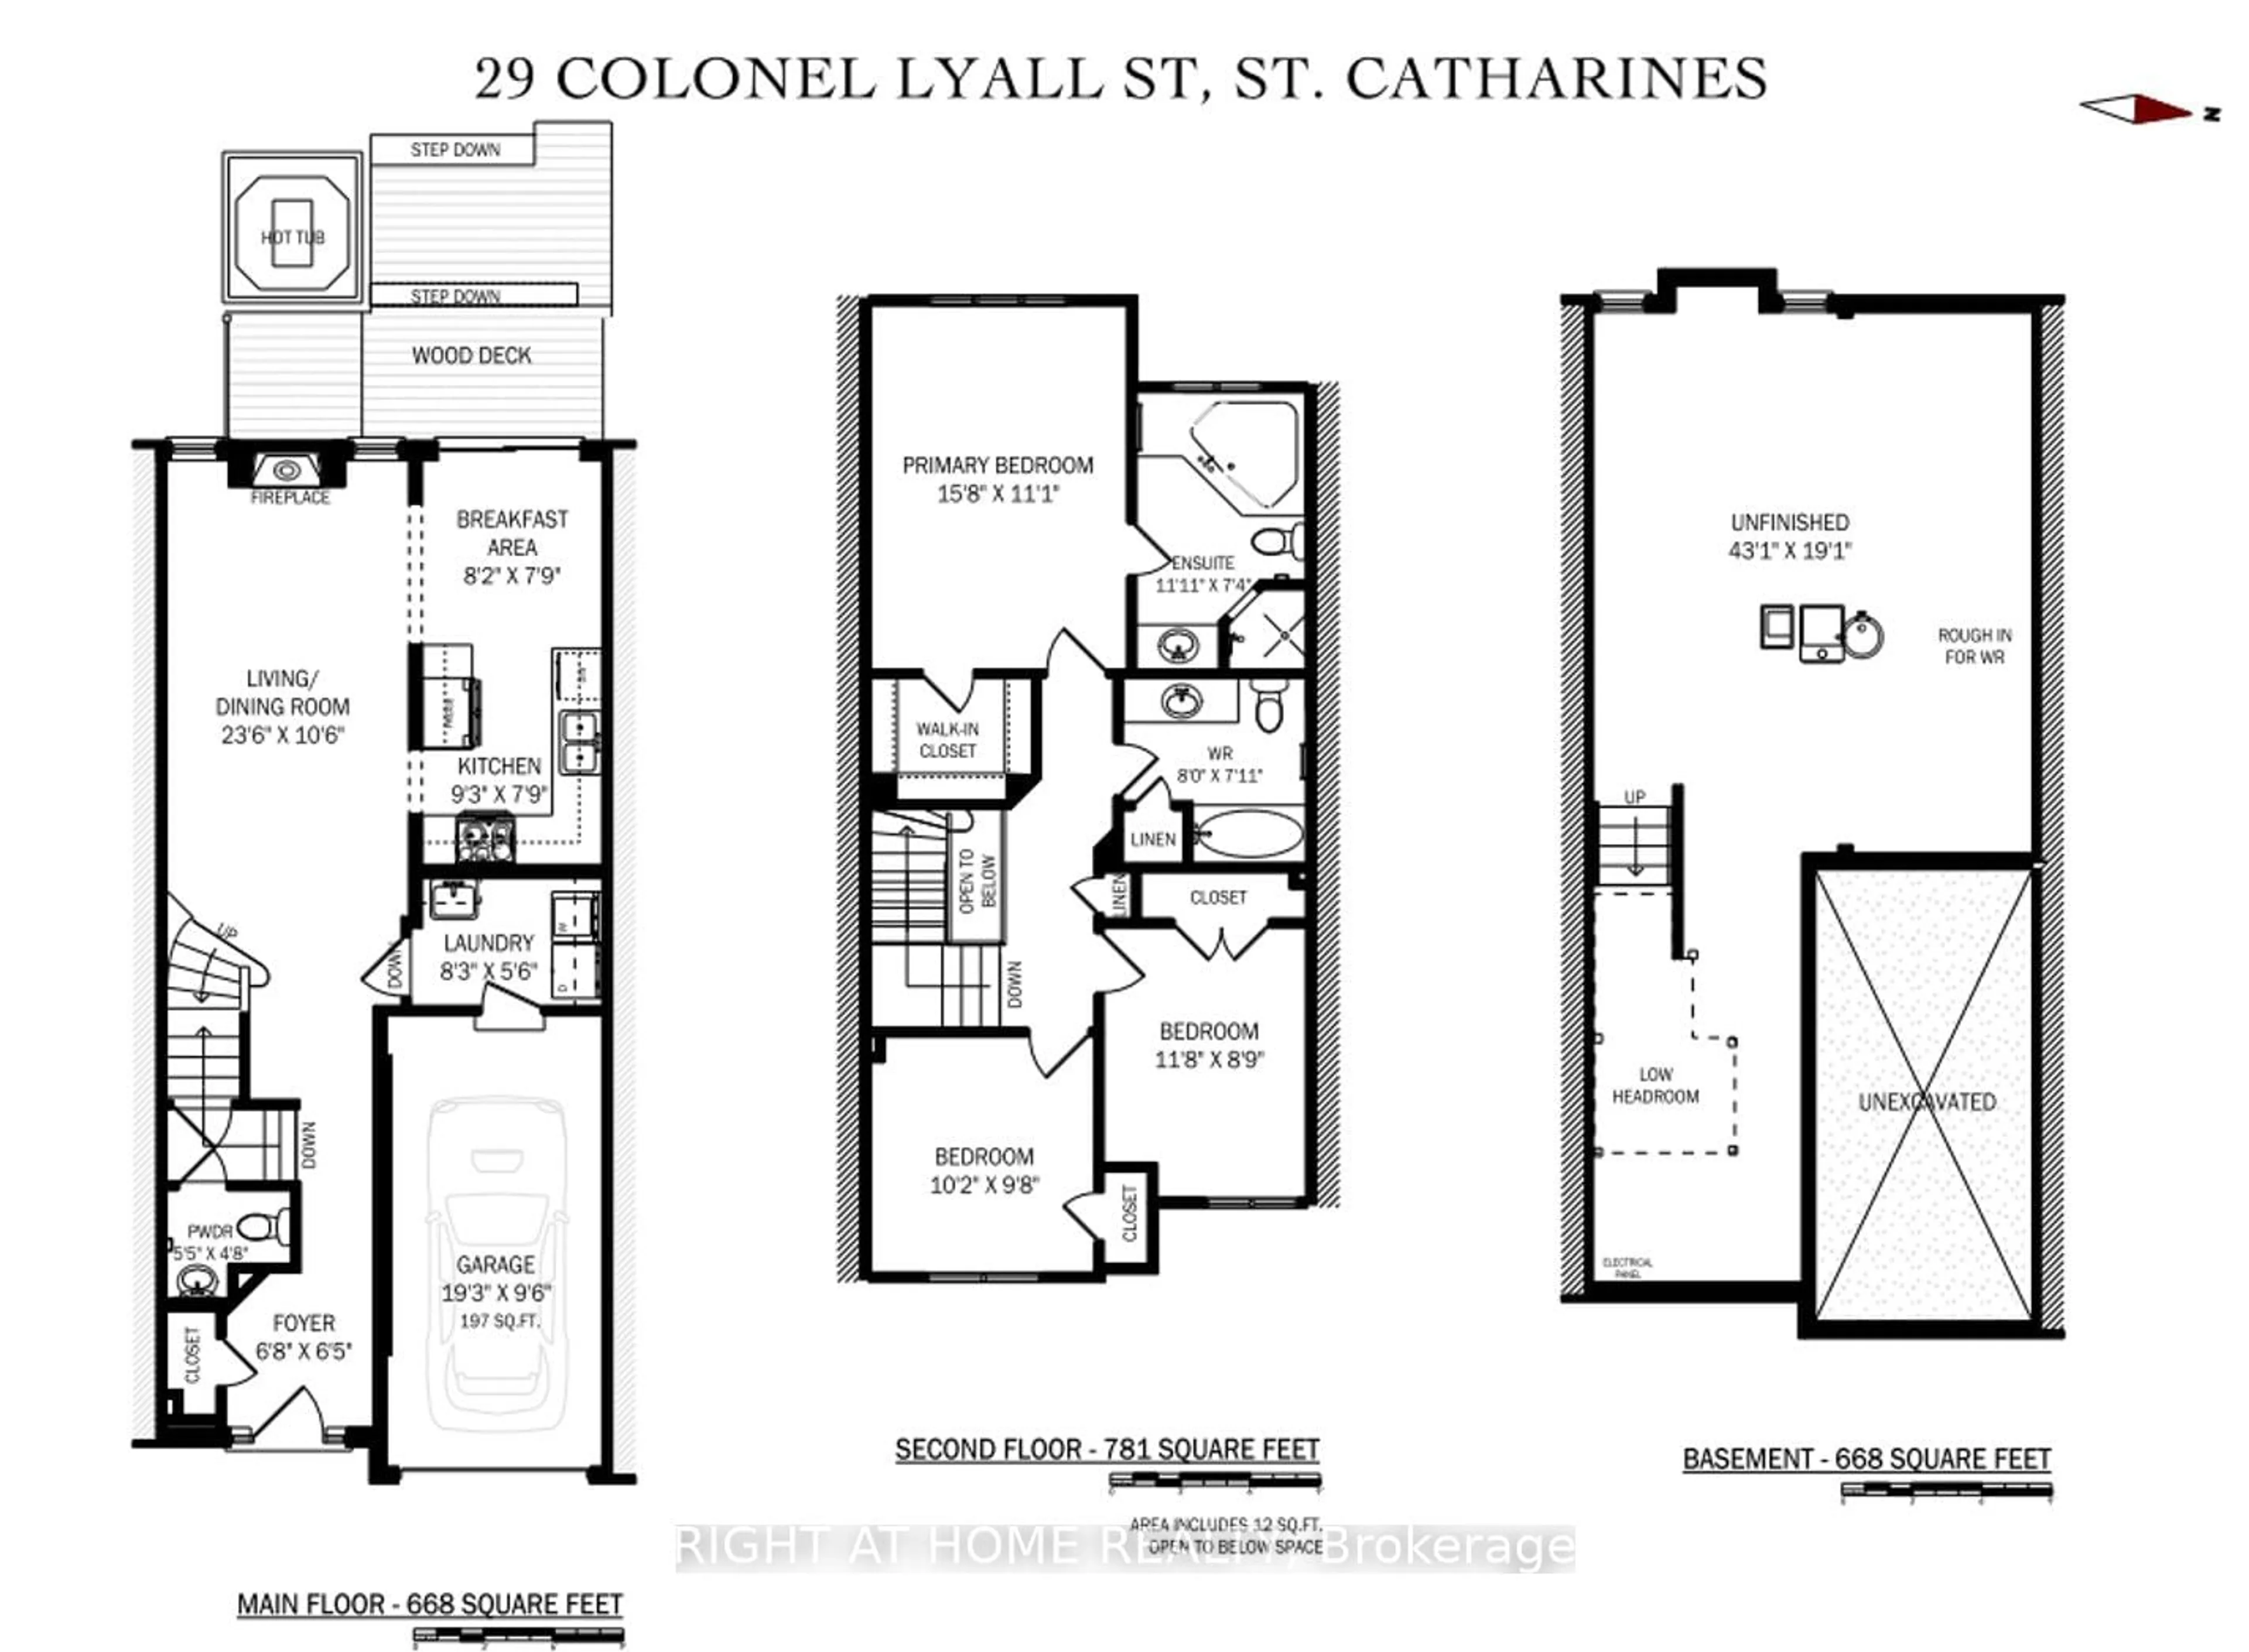 Floor plan for 29 Colonel Lyall St, St. Catharines Ontario L2P 0B3